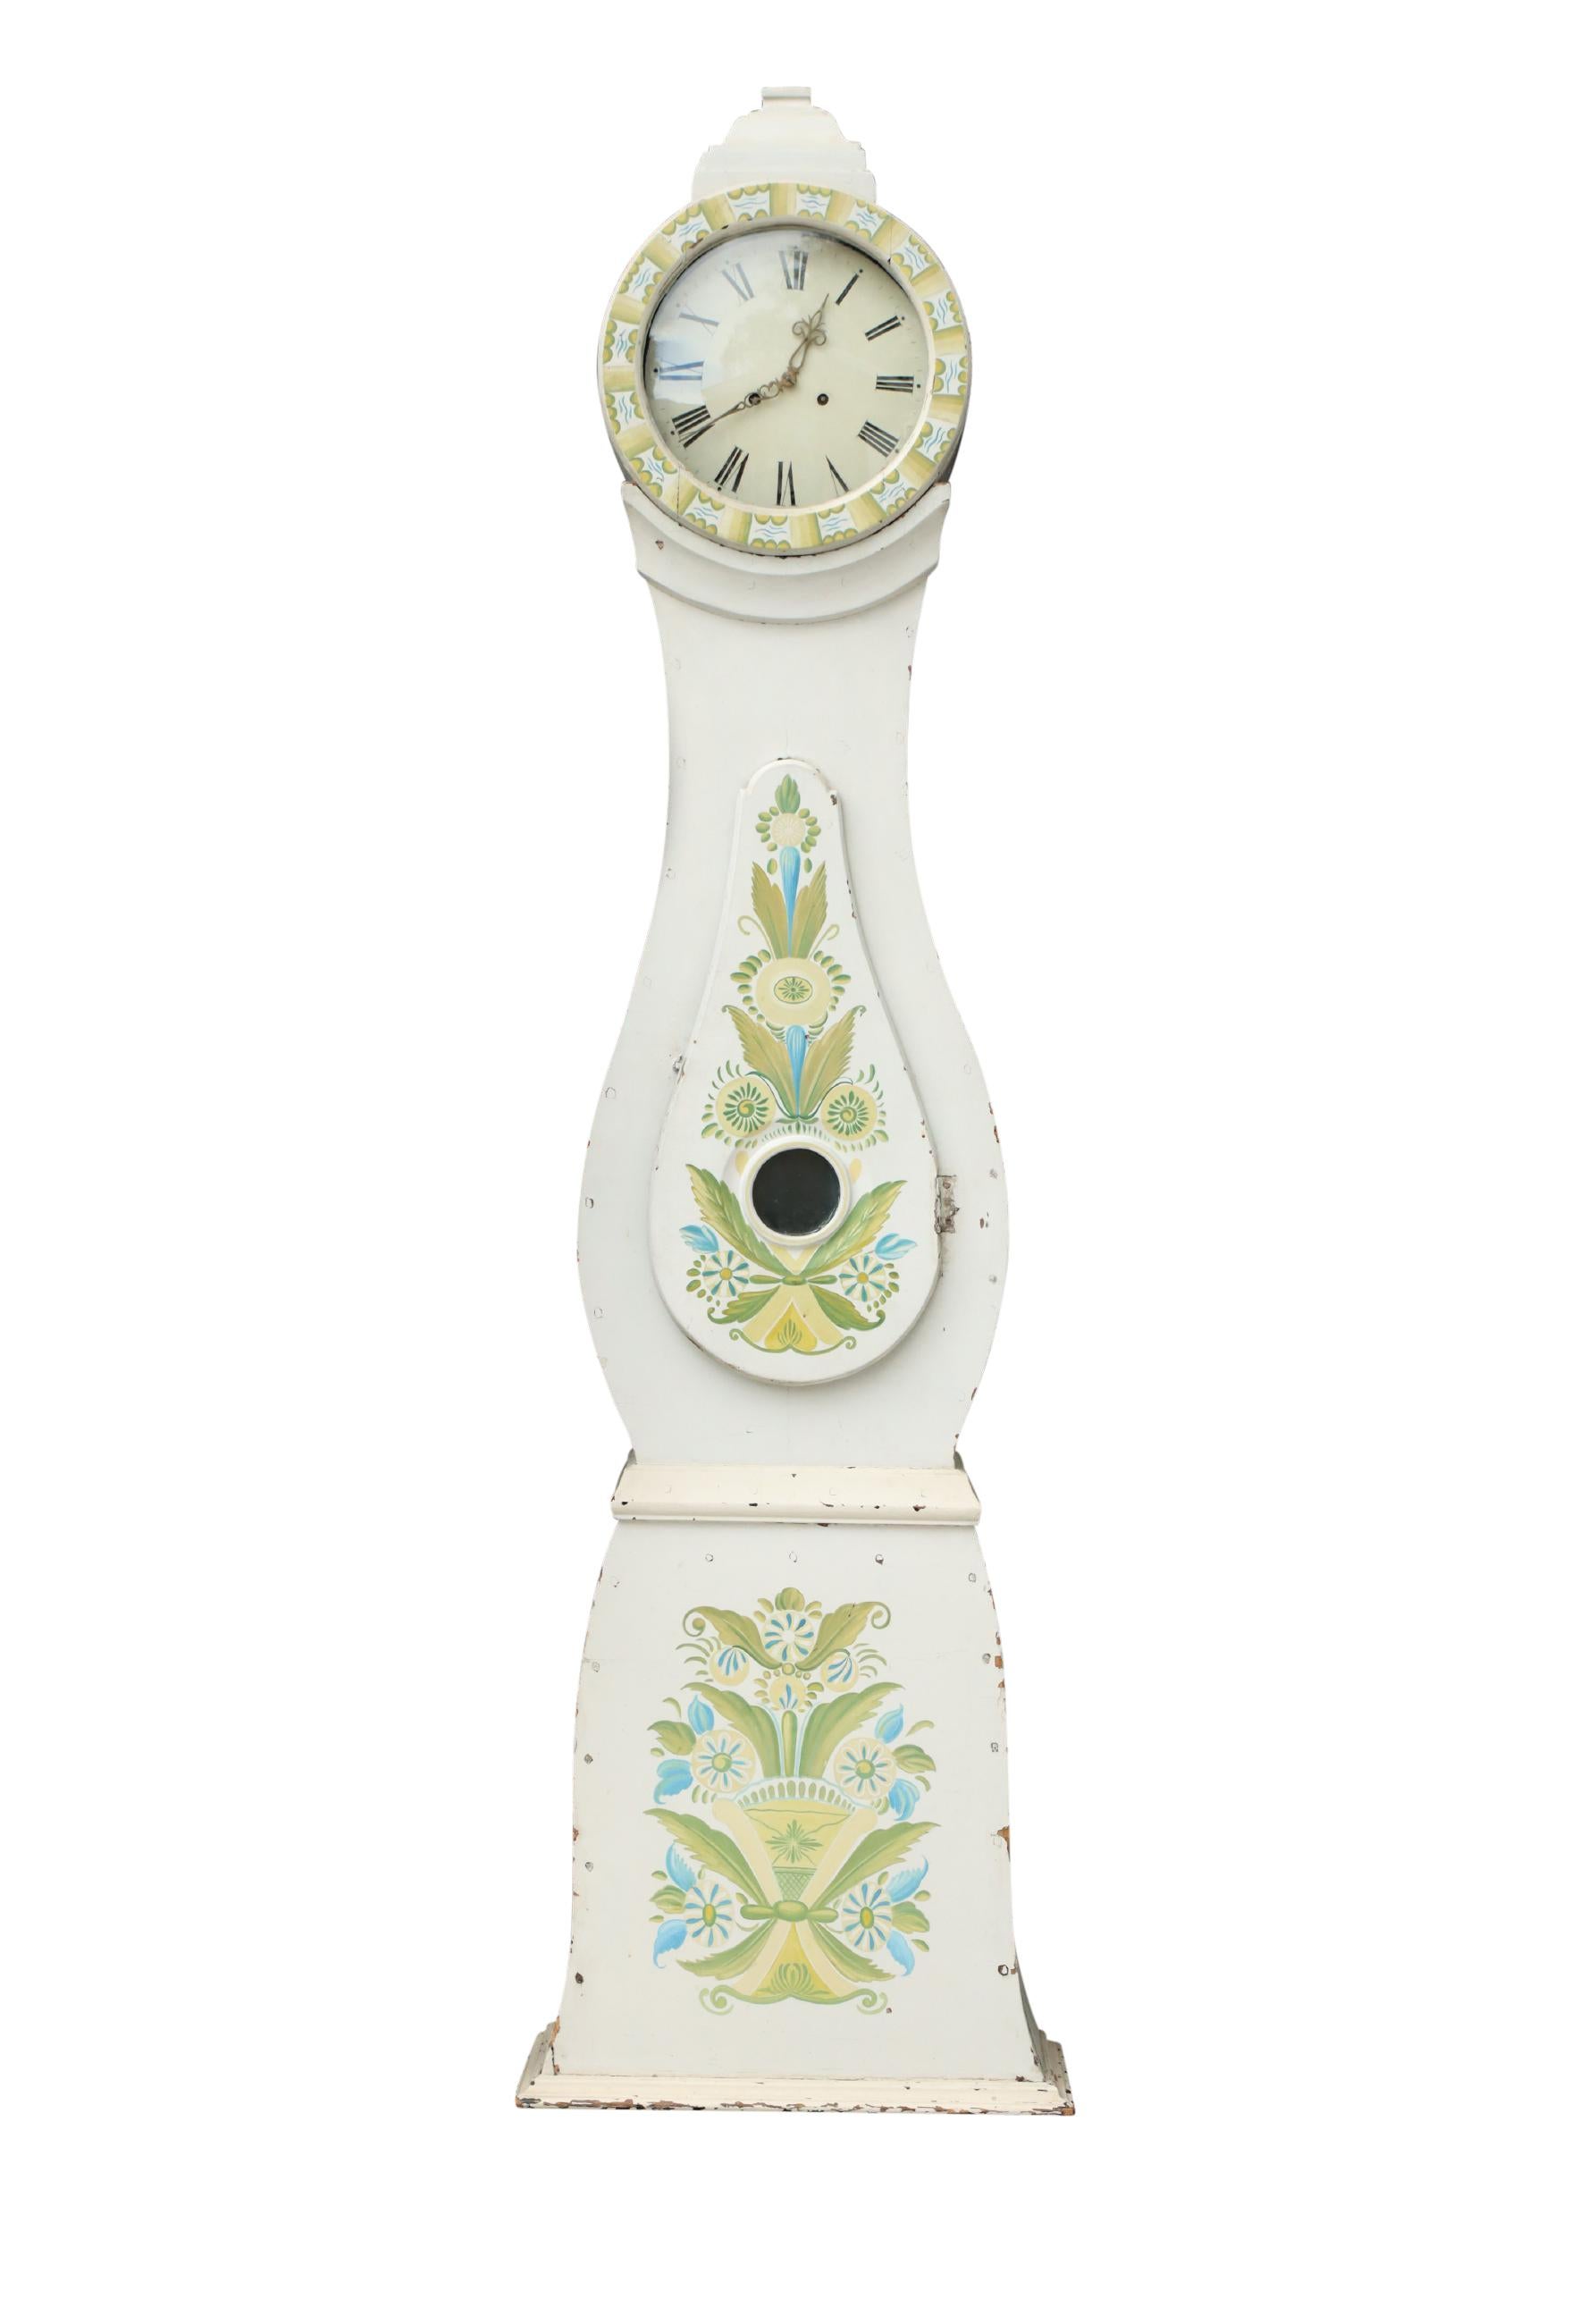 1800's Swedish Mora clock with hand painted floral details against a white painted background (original paintwork). Carved detailing of crown.  Working Longcase clock mechanism of pendulum and 2 weights and a bell chime on the hour.

Width:54cm /